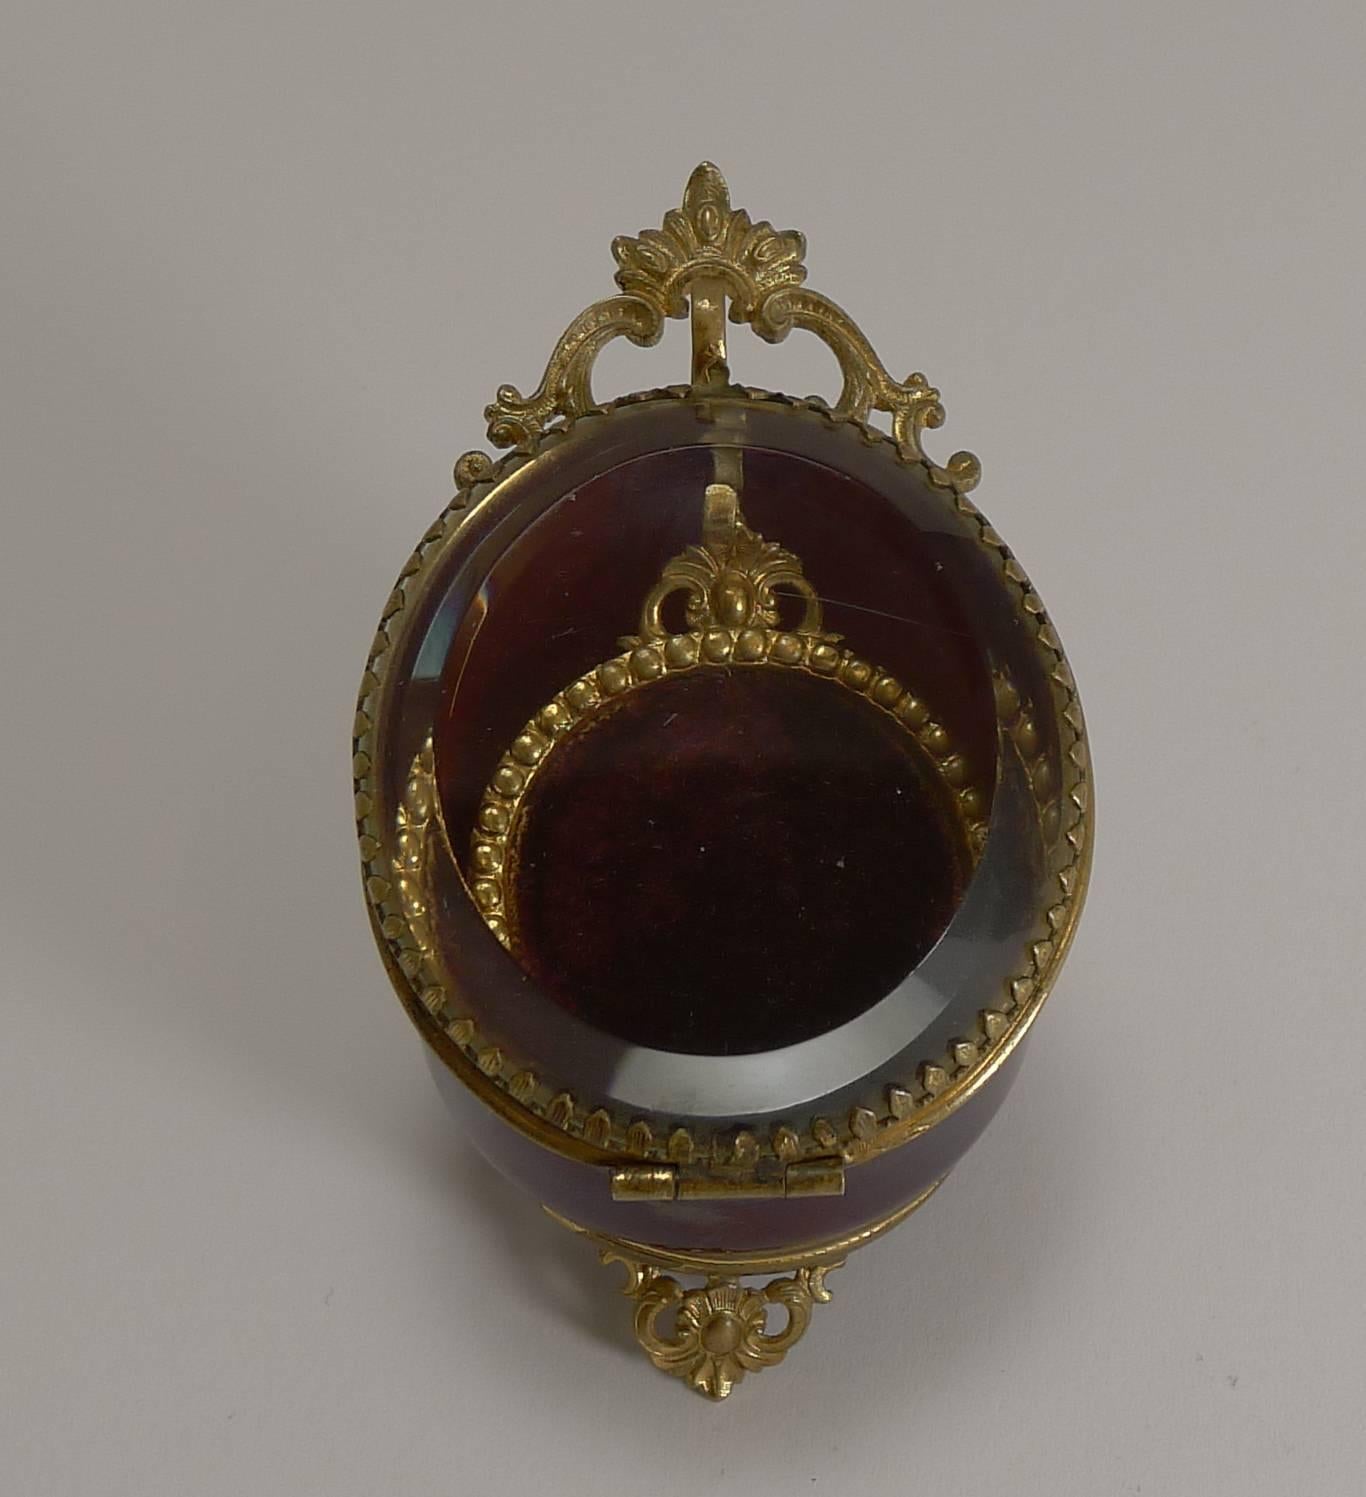 A pretty antique French pocket watch box, made from a deep red glass and lined with a rich Burgundy velvet with an original thick bevelled glass lid.

The fittings including the three pierced or reticulated feet are made from gilded brass. Once